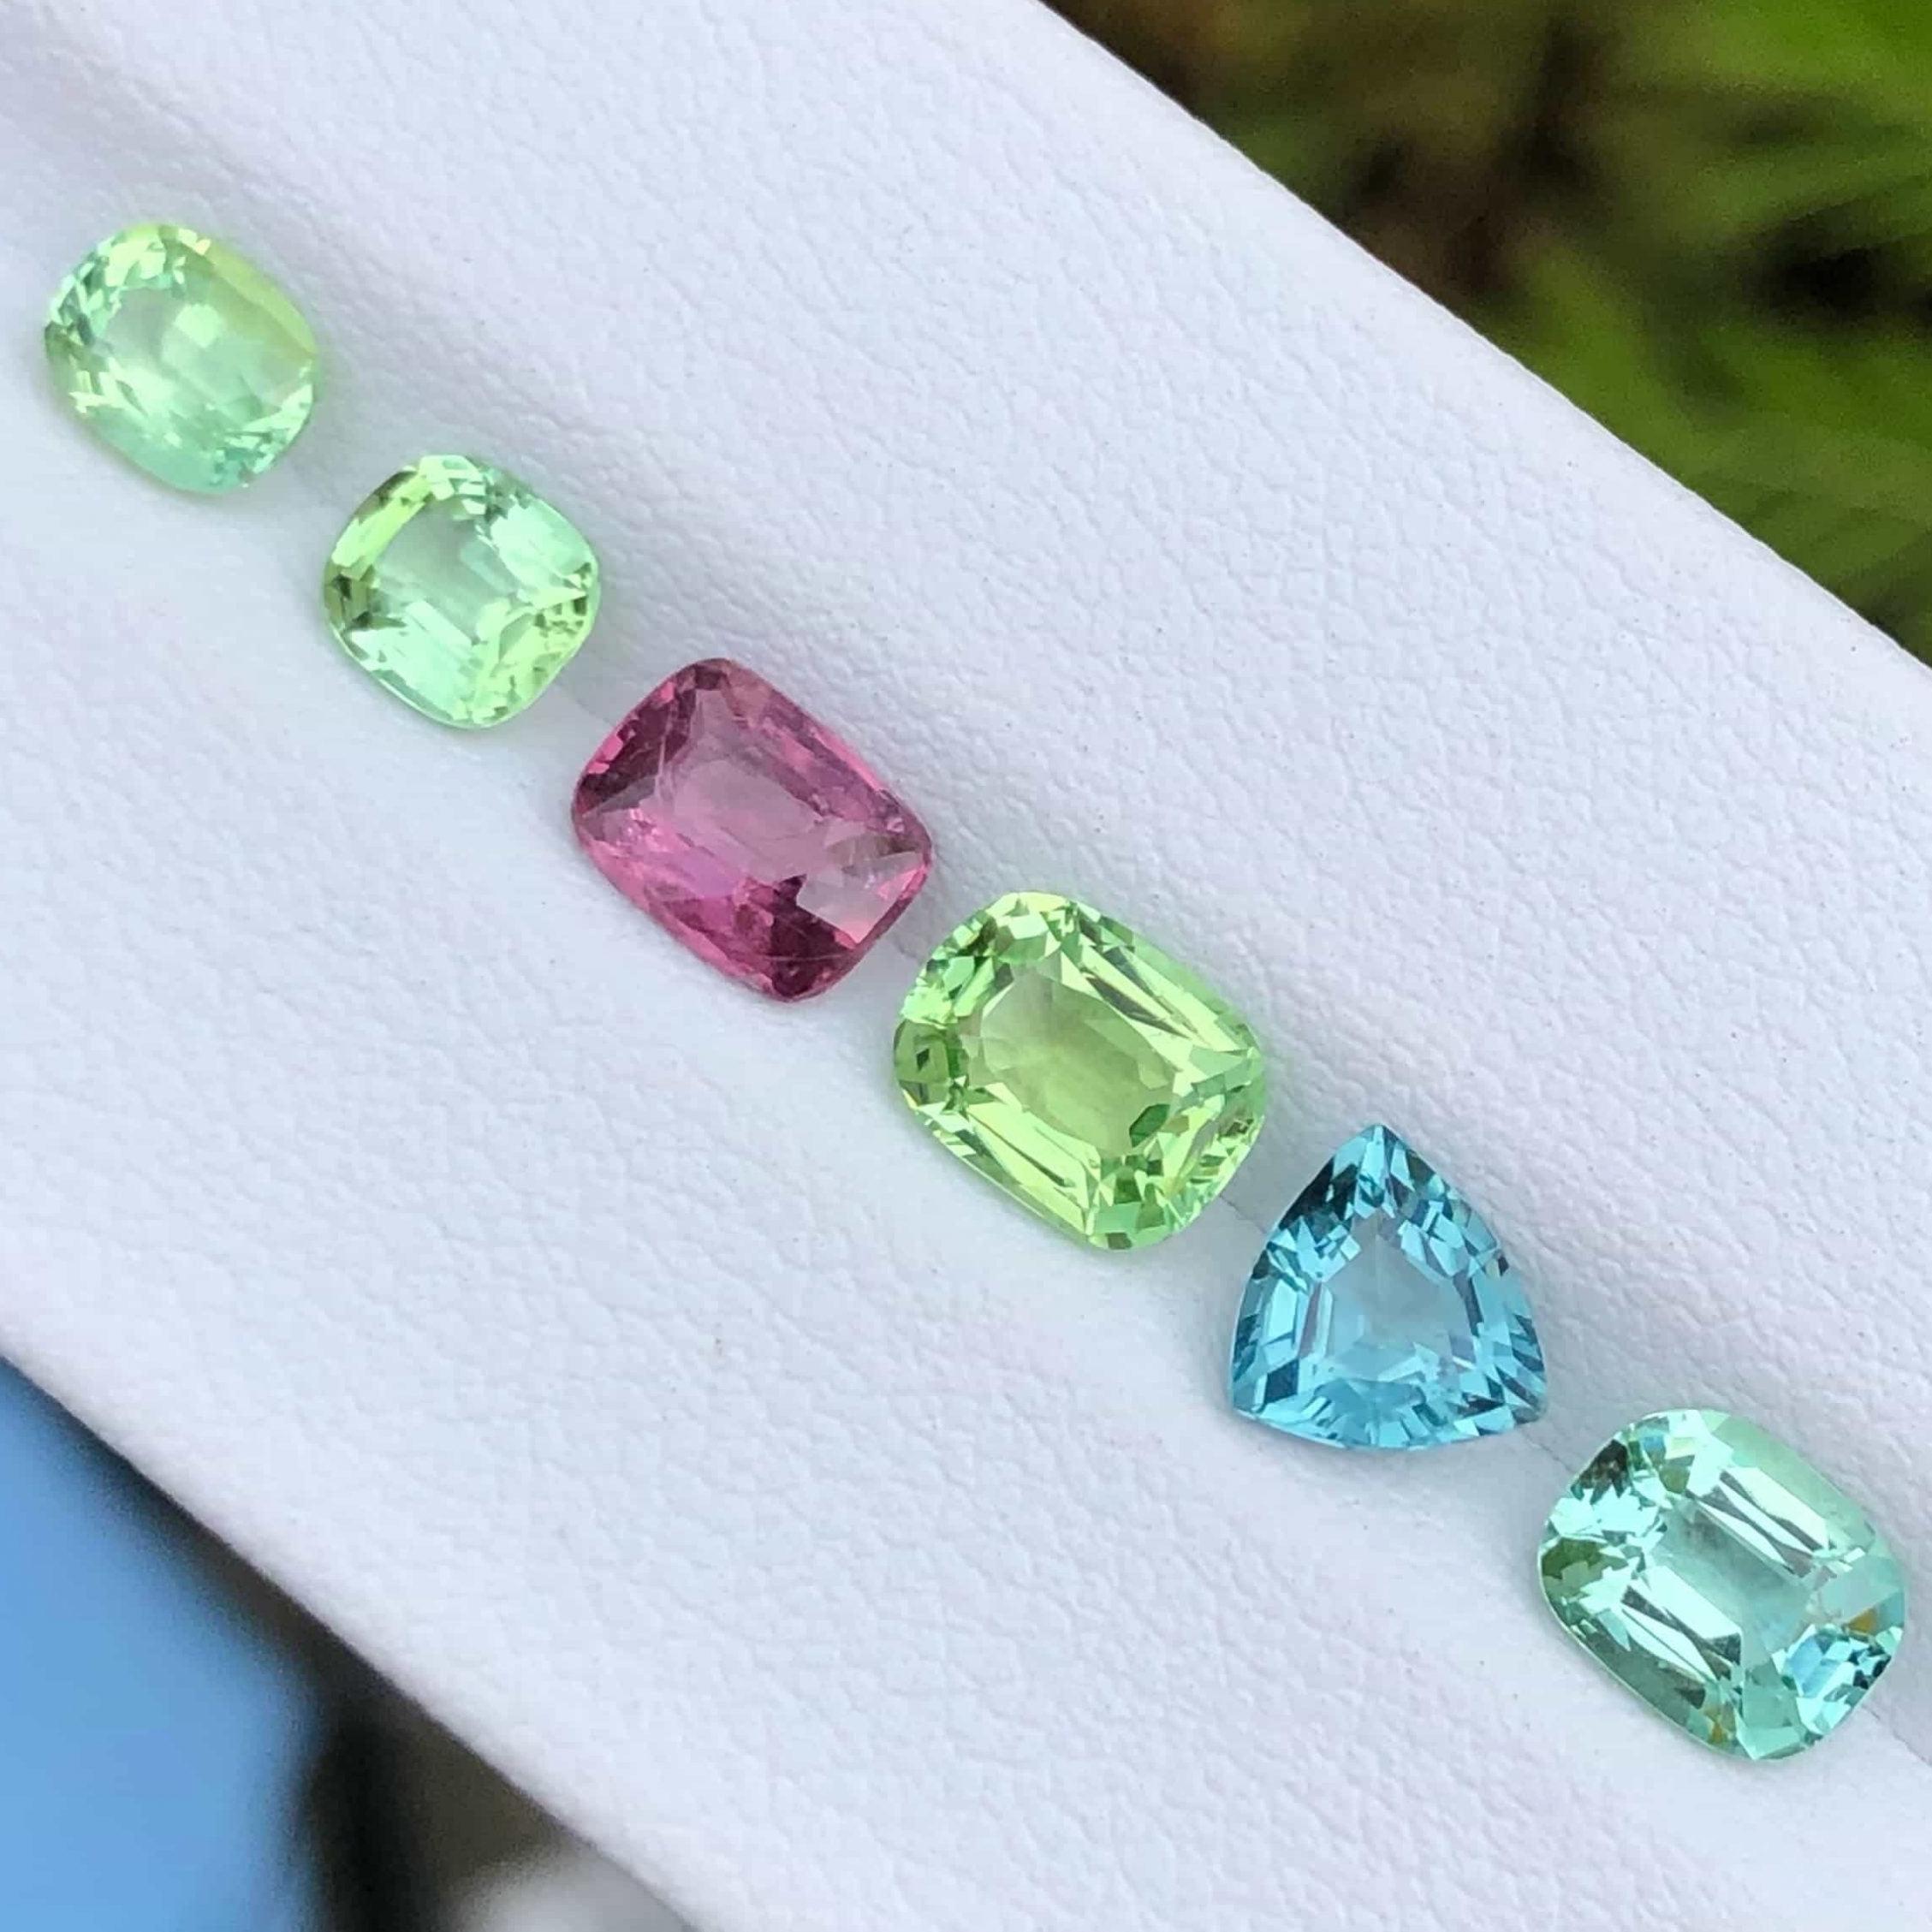 Gemstone Name	Multi-Color Mix Tourmaline Lot
Weight	4.95 carats
Weight Range	0.45 to 1.05 carats
Clarity	VVS to Eye Clean
Origin	Afghanistan
Treatment	None




Experience the enchanting allure of our Multi Color Mix Tourmaline Lot, a breathtaking